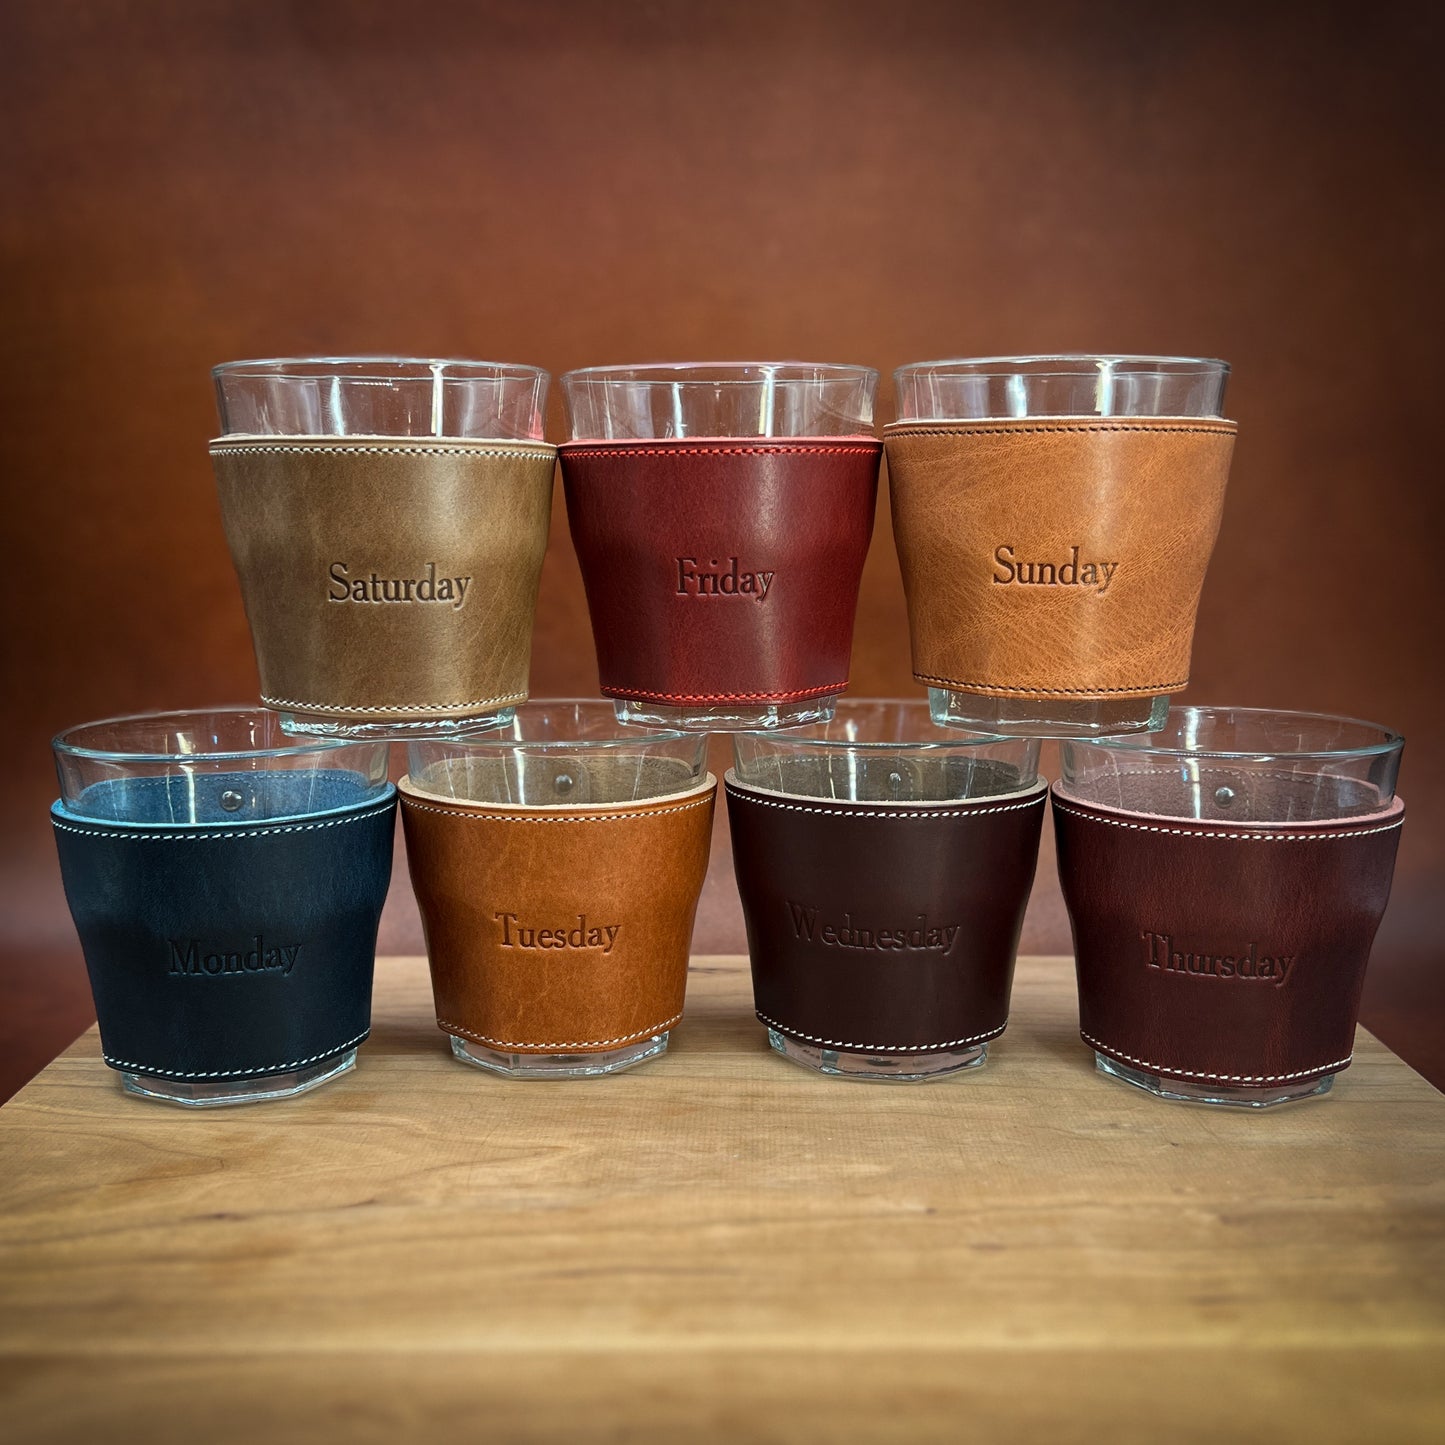 Horween Leather Wrapped Whiskey Glasses in colors for every decor.